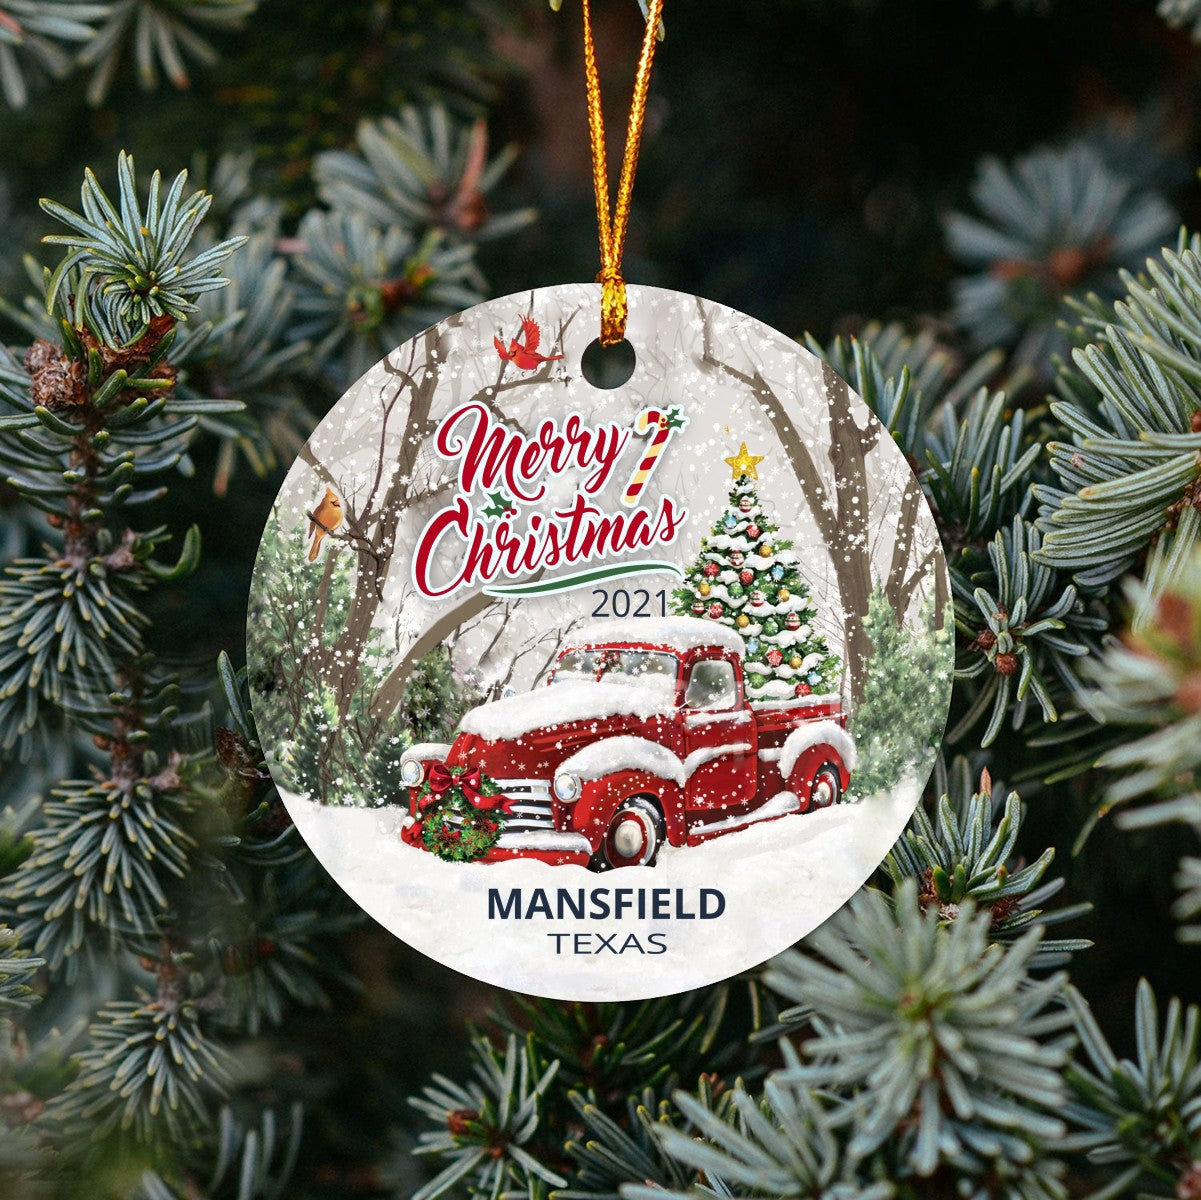 Christmas Tree Ornaments Mansfield - Ornament Customize With Name City And State Mansfield Texas TX - Red Truck Xmas Ornaments 3'' Plastic Gift For Family, Friend And Housewarming